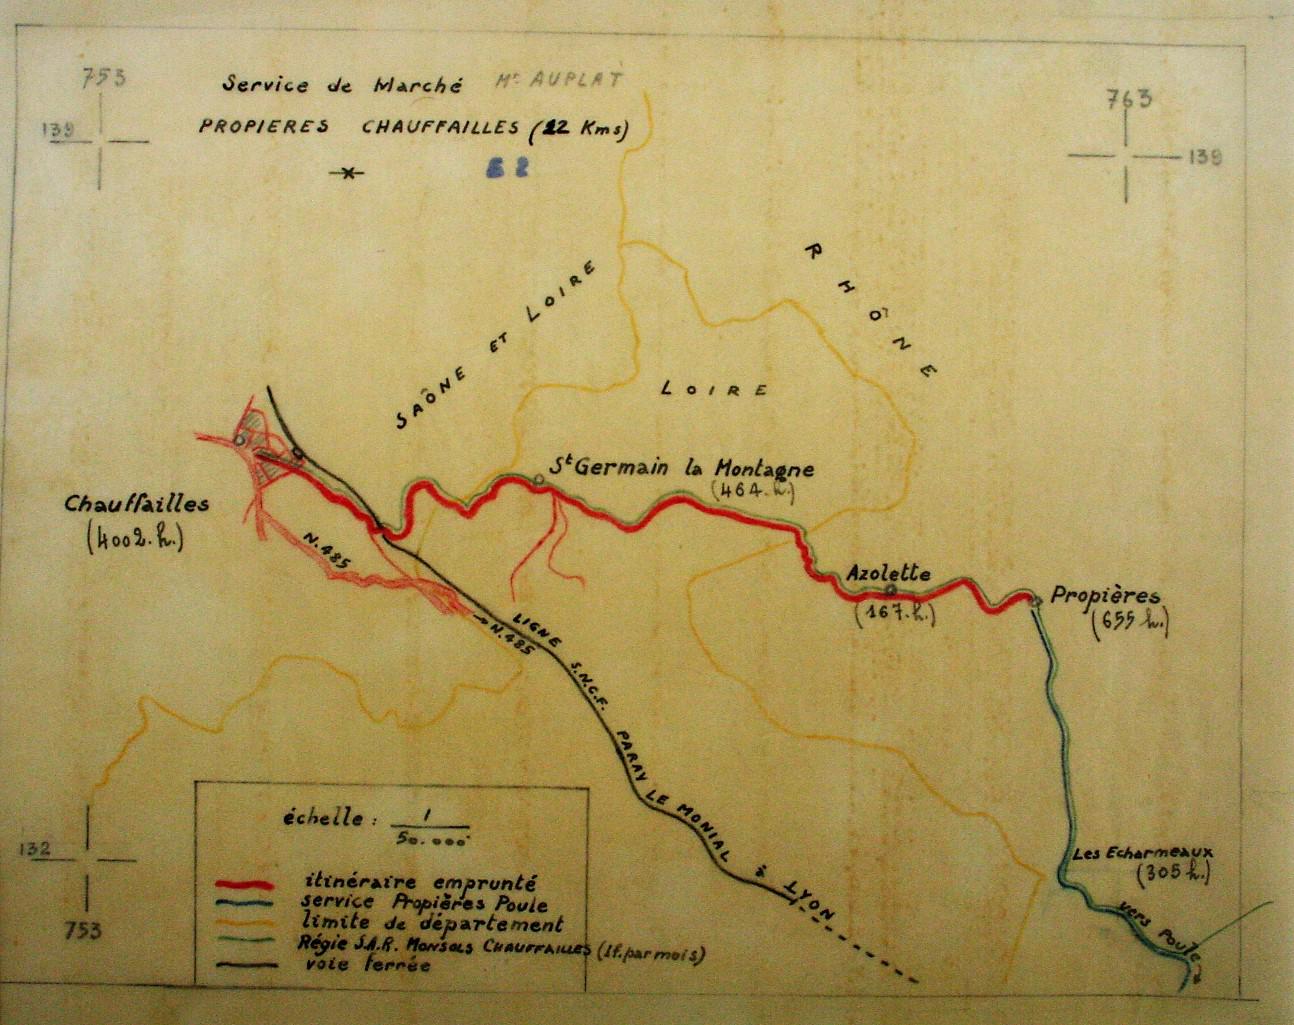 Propières to Chauffailles route in 1952